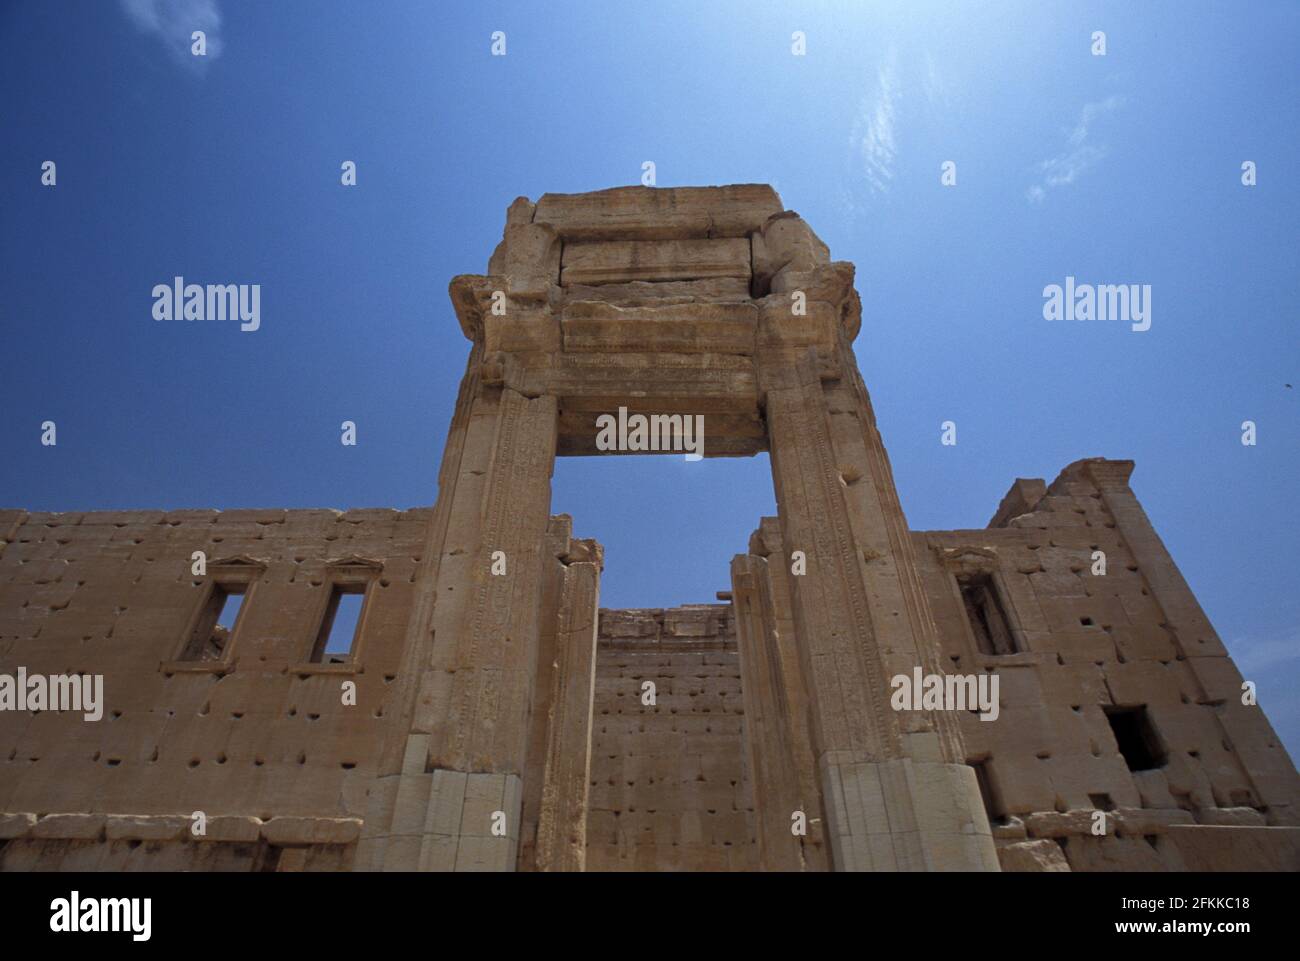 Cella of the Temple of Bel, already destroyed by ISIL August 2015, Temple of Baal, was an ancient stone ruin located in Palmyra, Syria Stock Photo